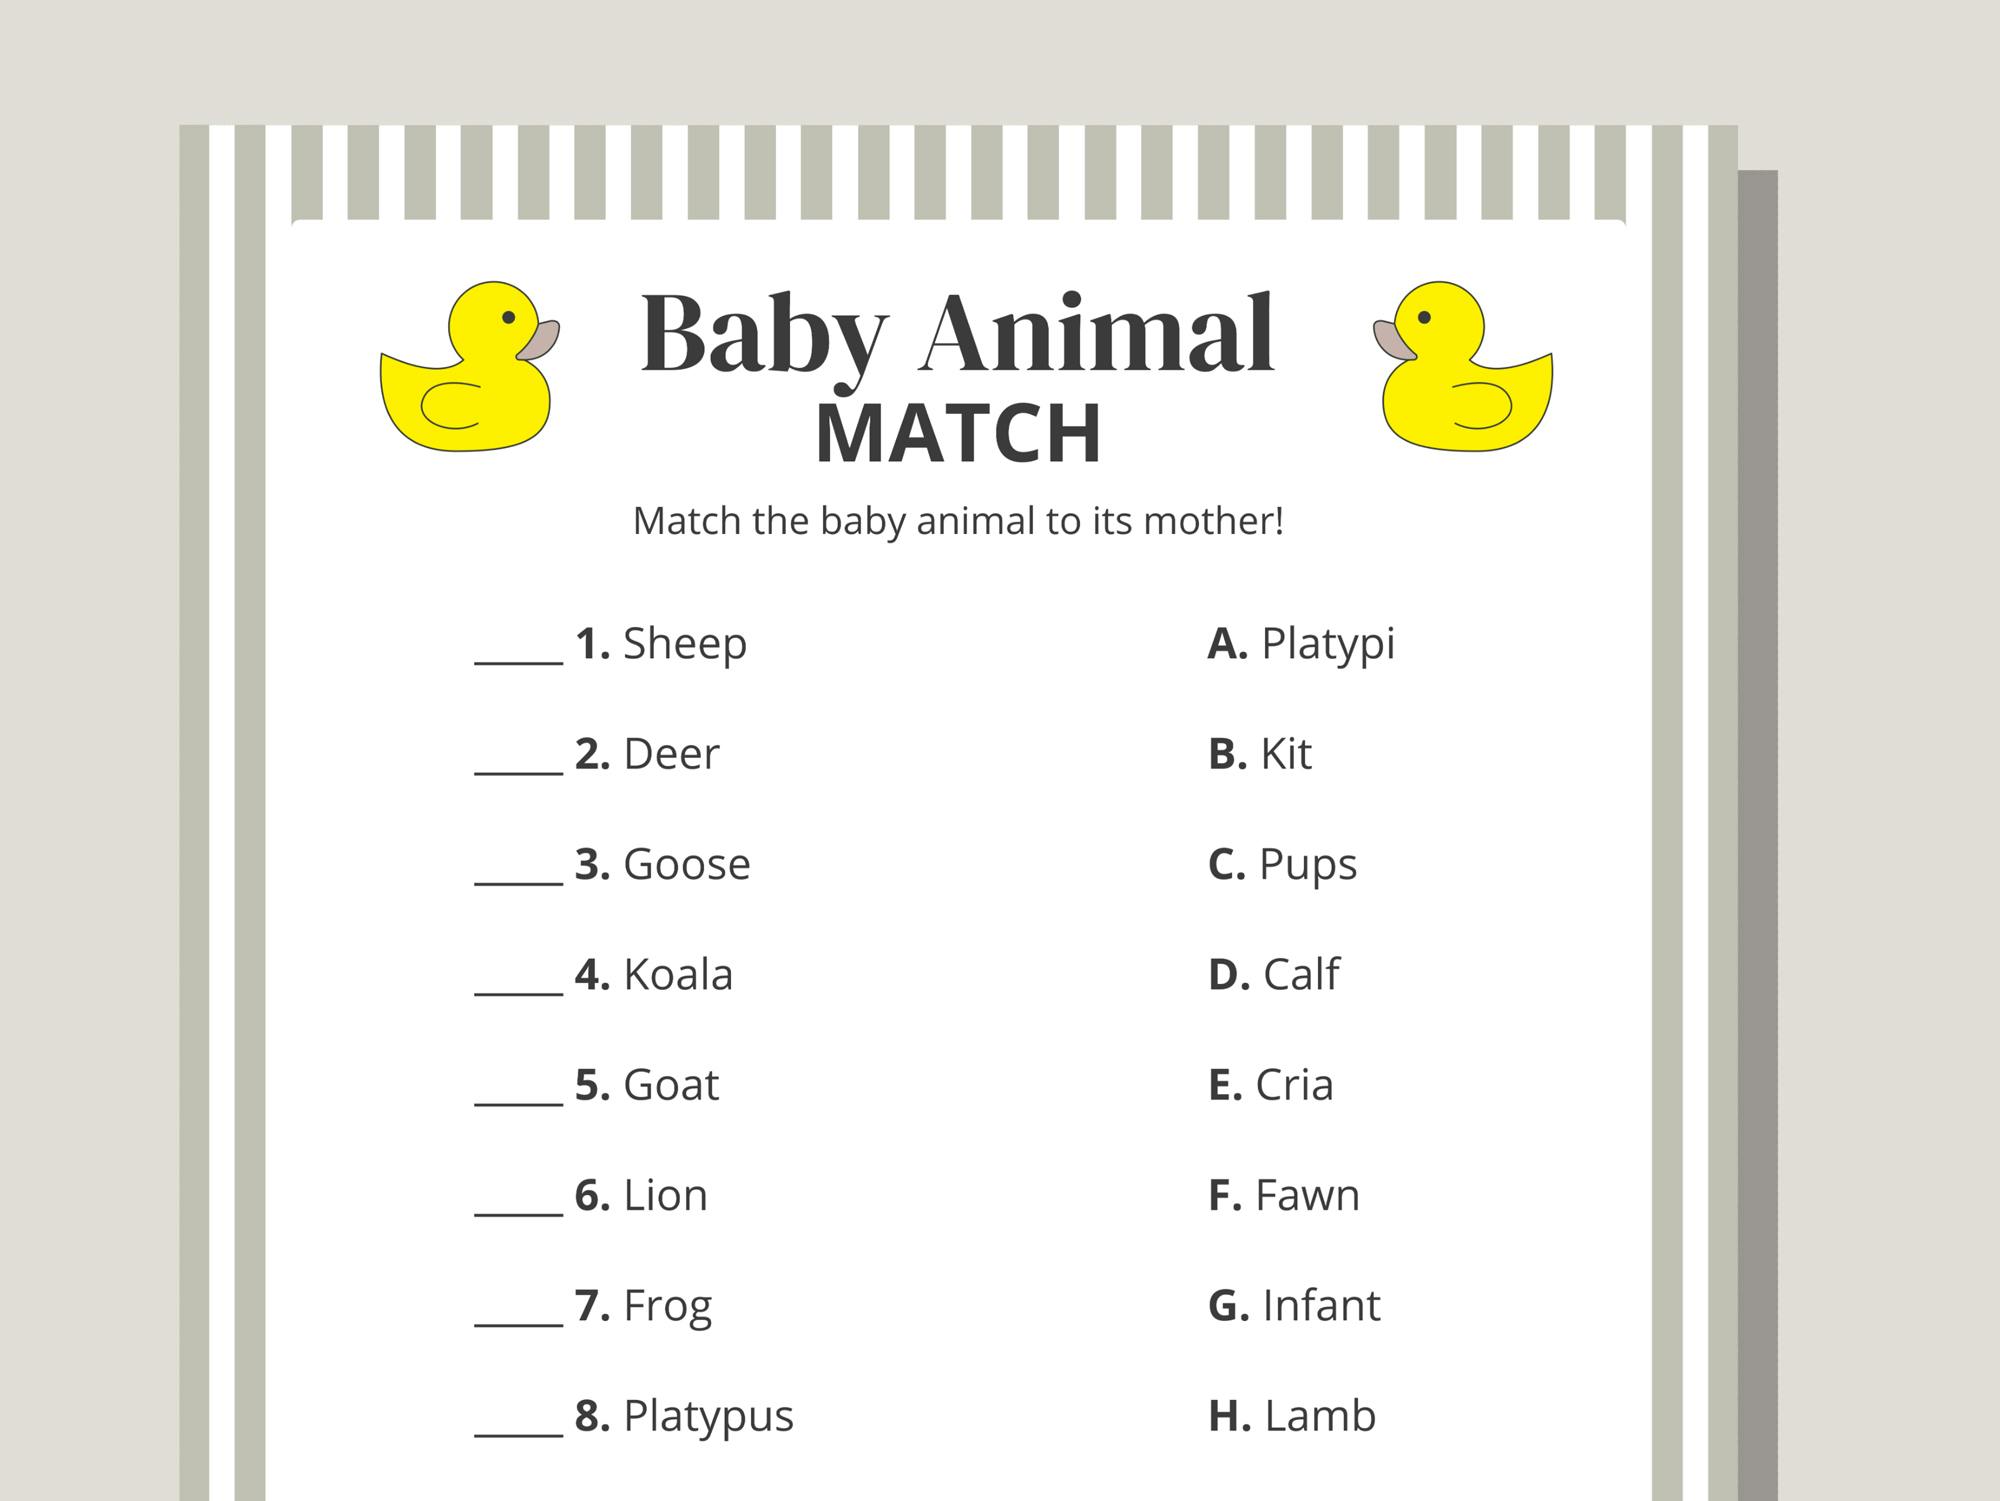 Be Hostess with the Mostest Thanks Free Baby Shower Games - The Krazy Coupon Lady